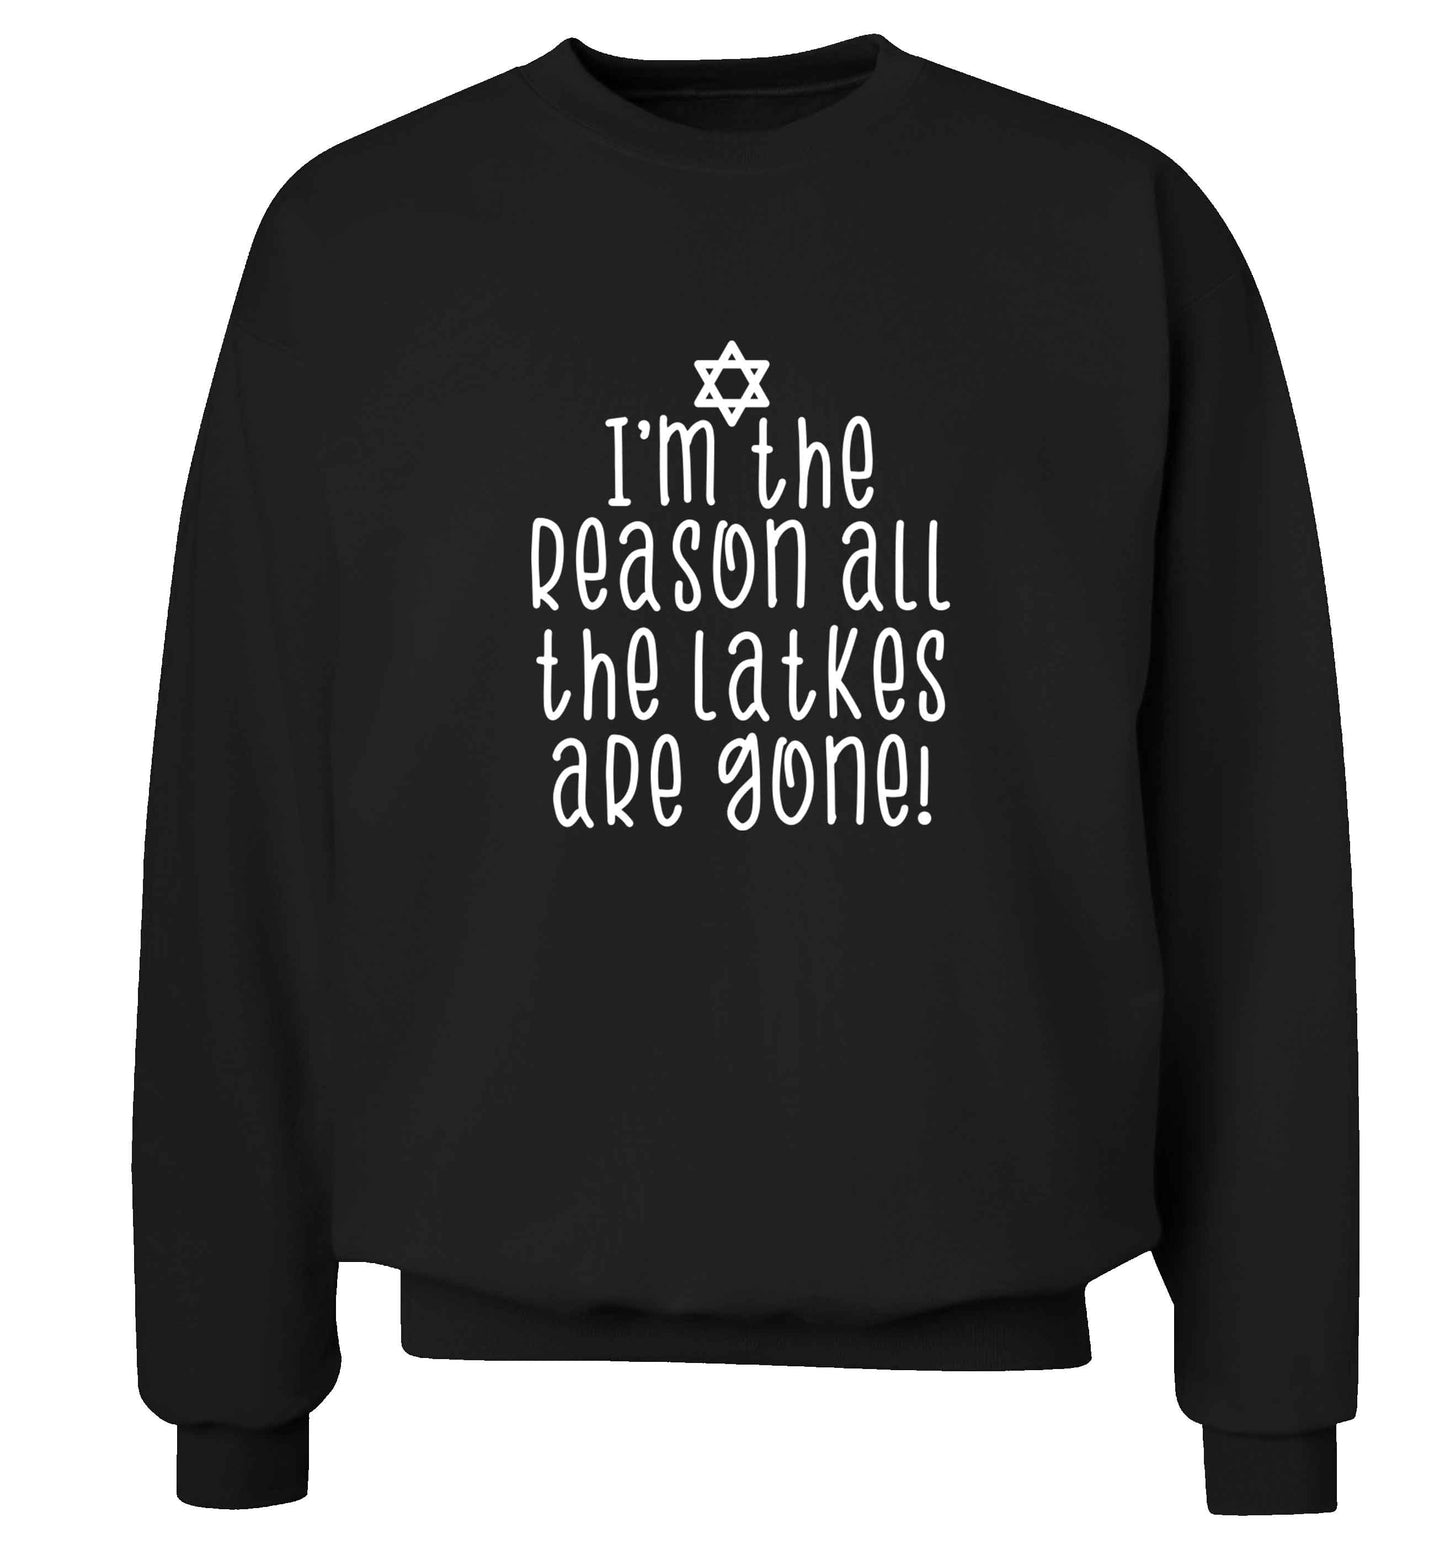 I'm the reason all the latkes are gone adult's unisex black sweater 2XL